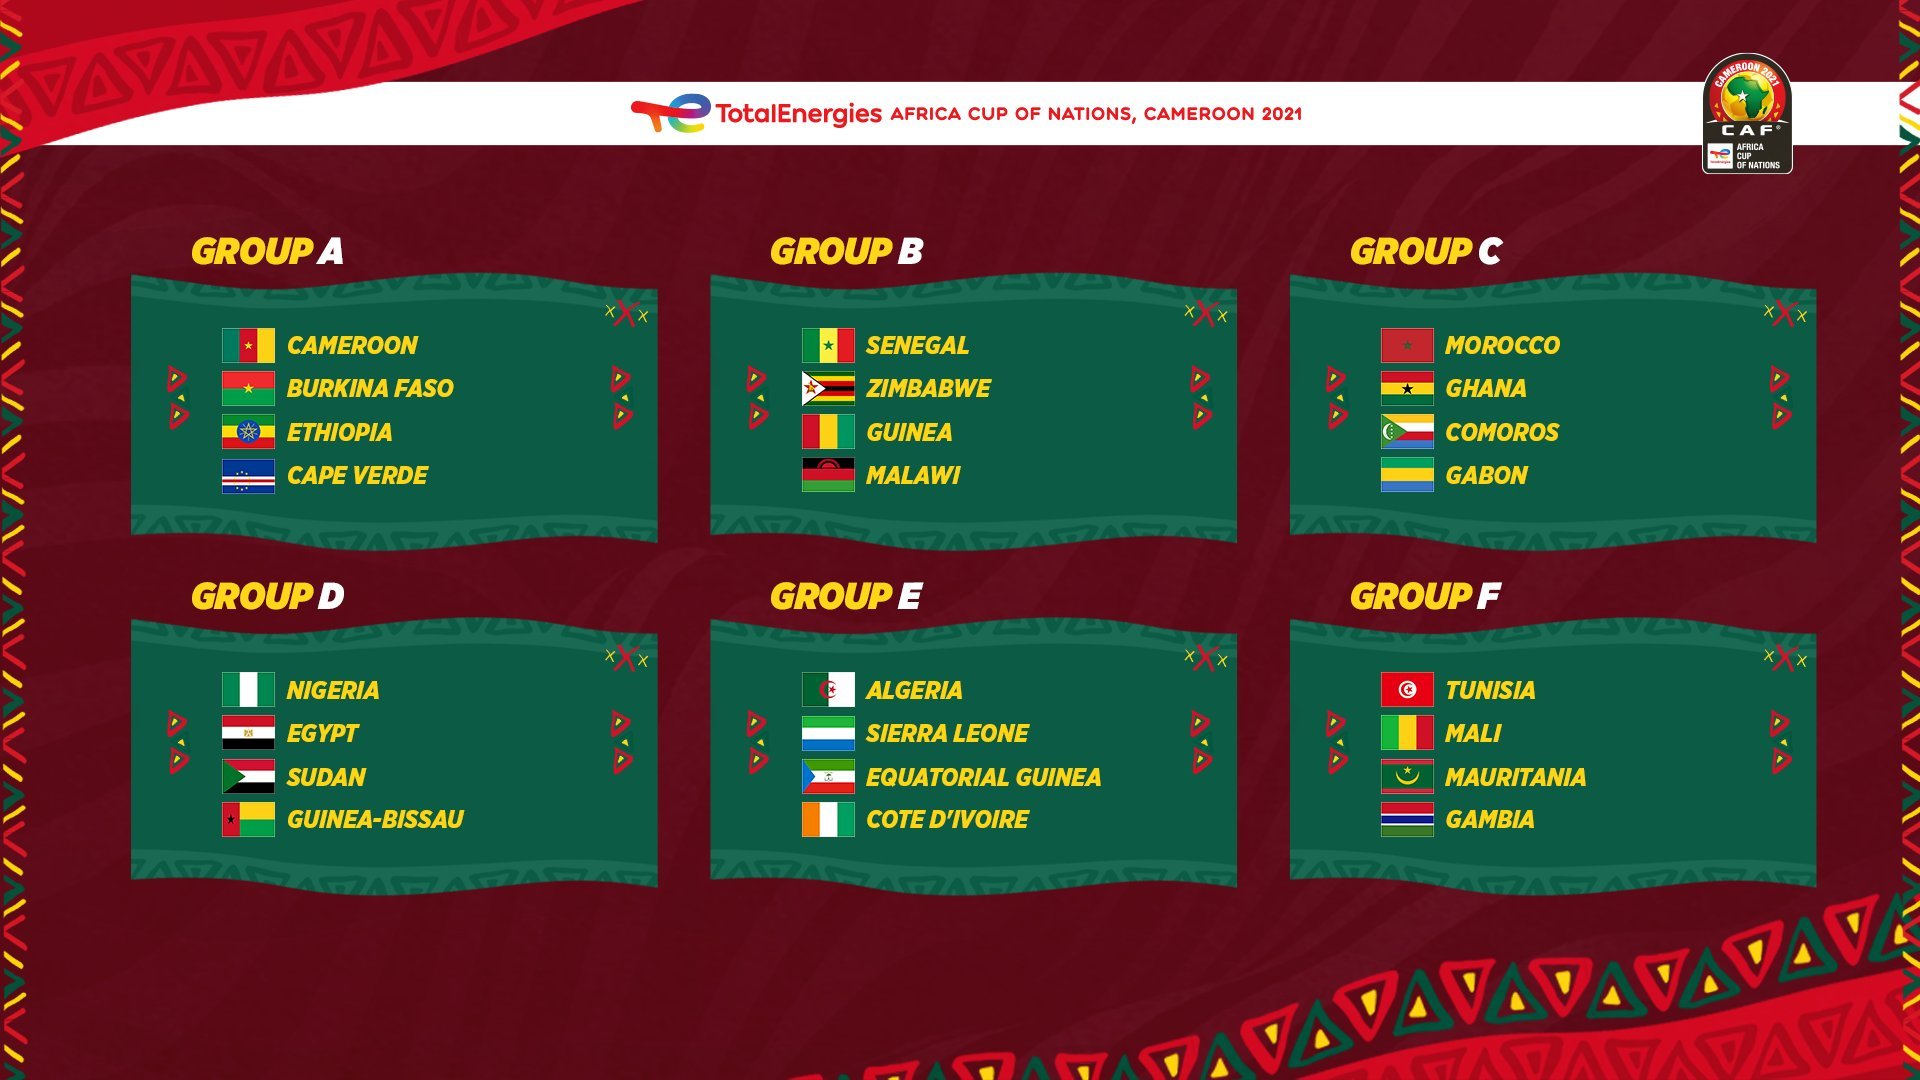 AFCON 2021 groups